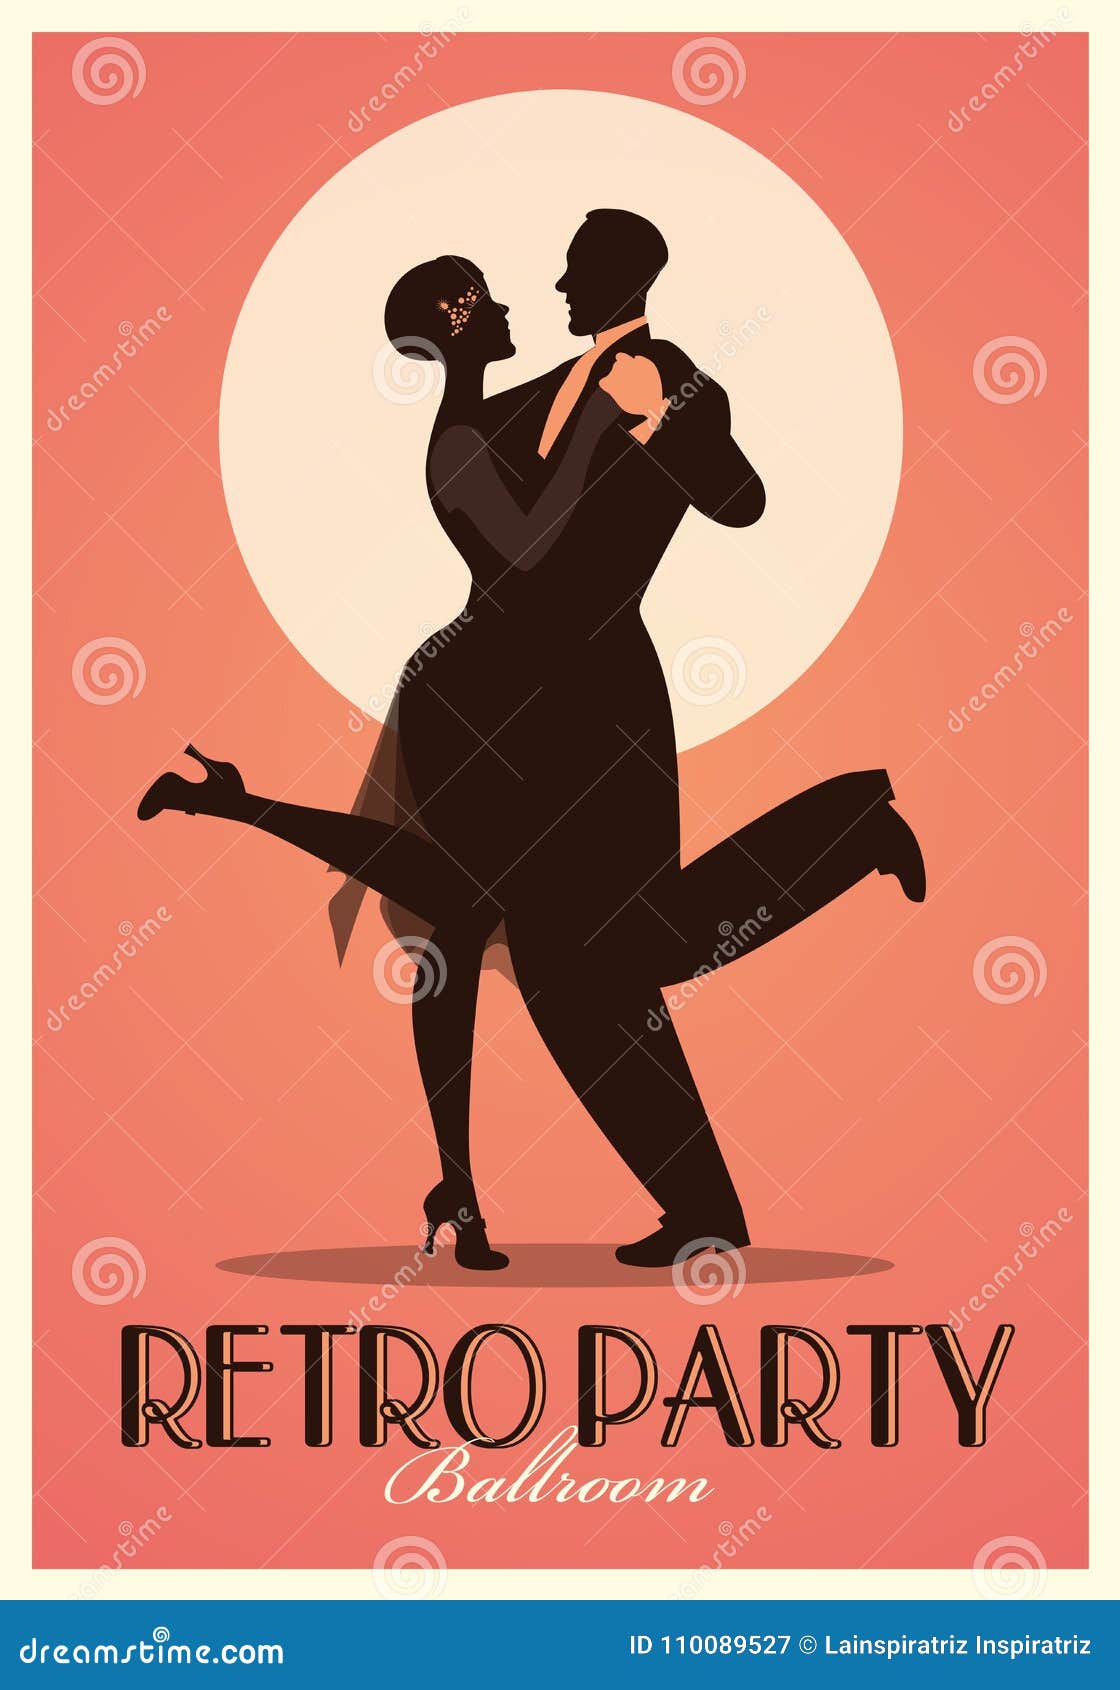 retro party poster. silhouettes of couple wearing clothes in the style of the twenties dancing charleston